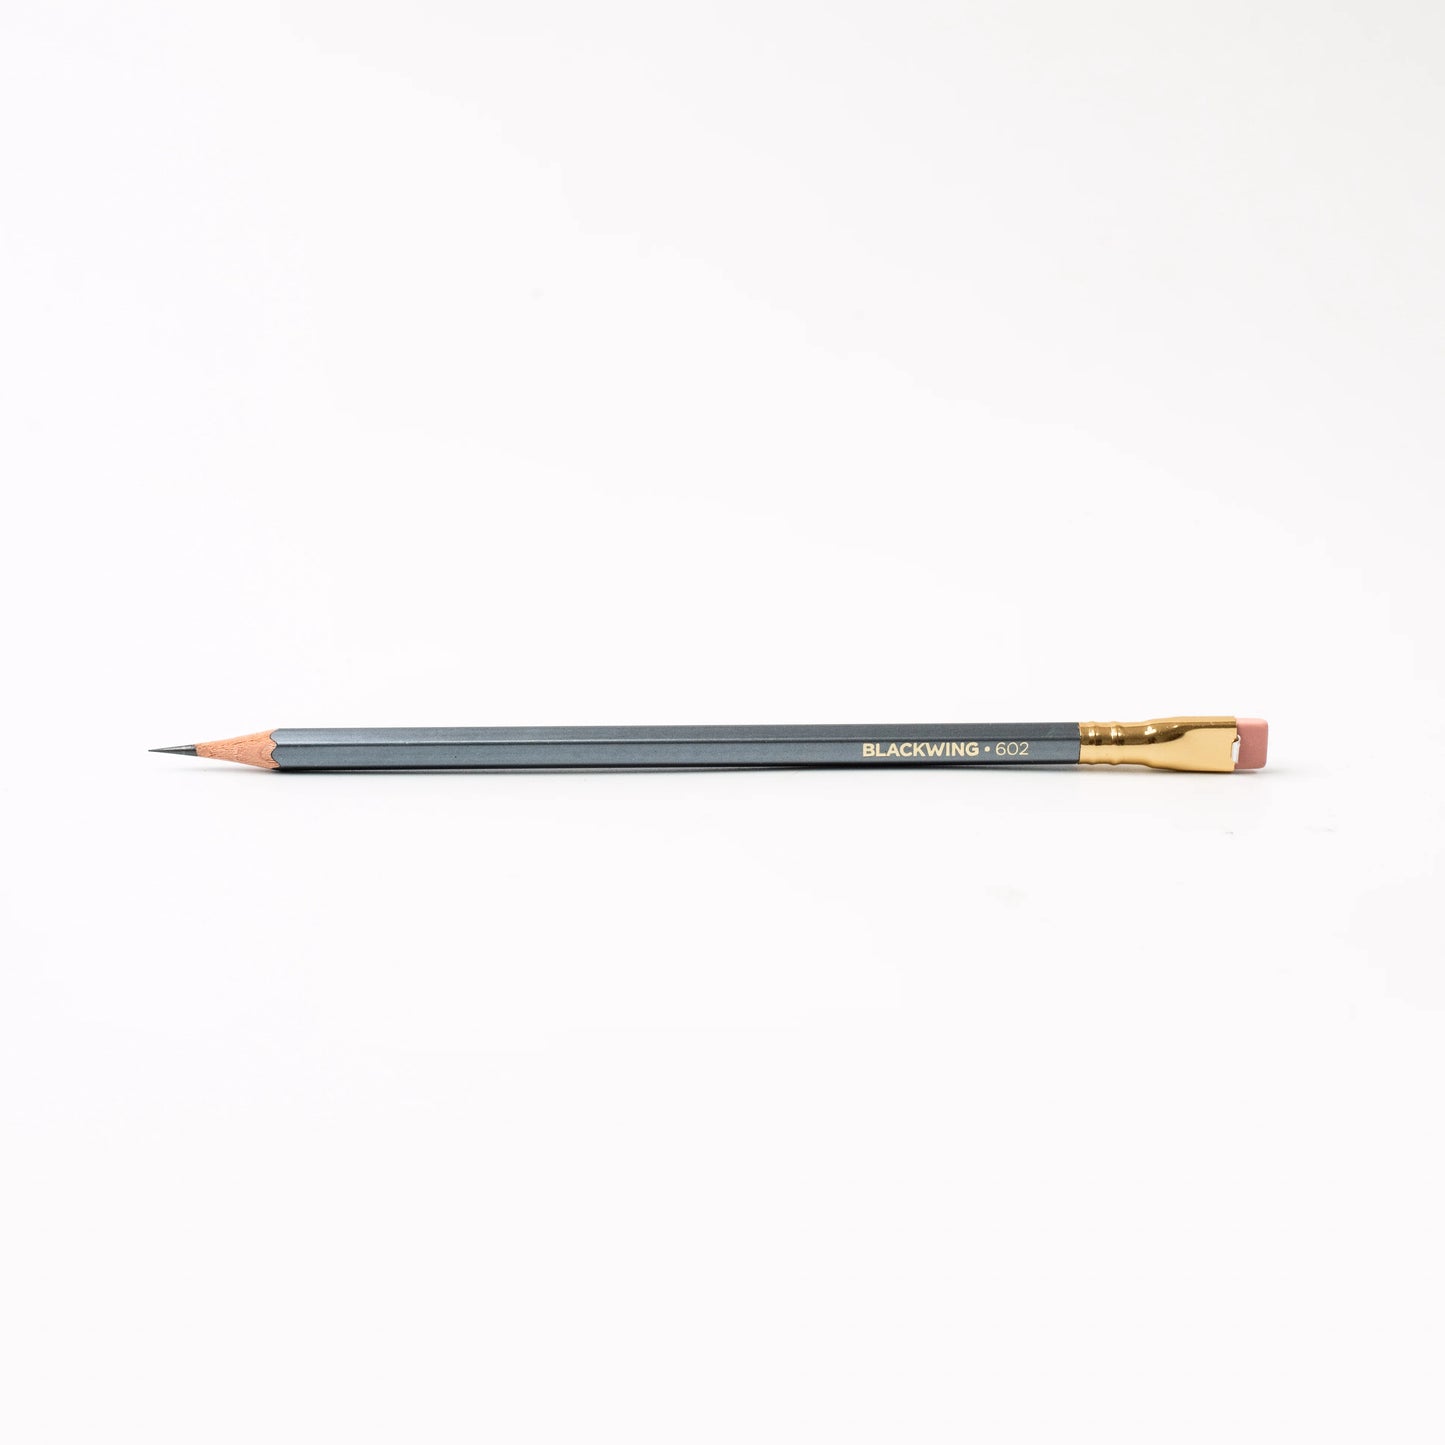 Blackwing Pencil 602, Firm Graphite - Box of 12